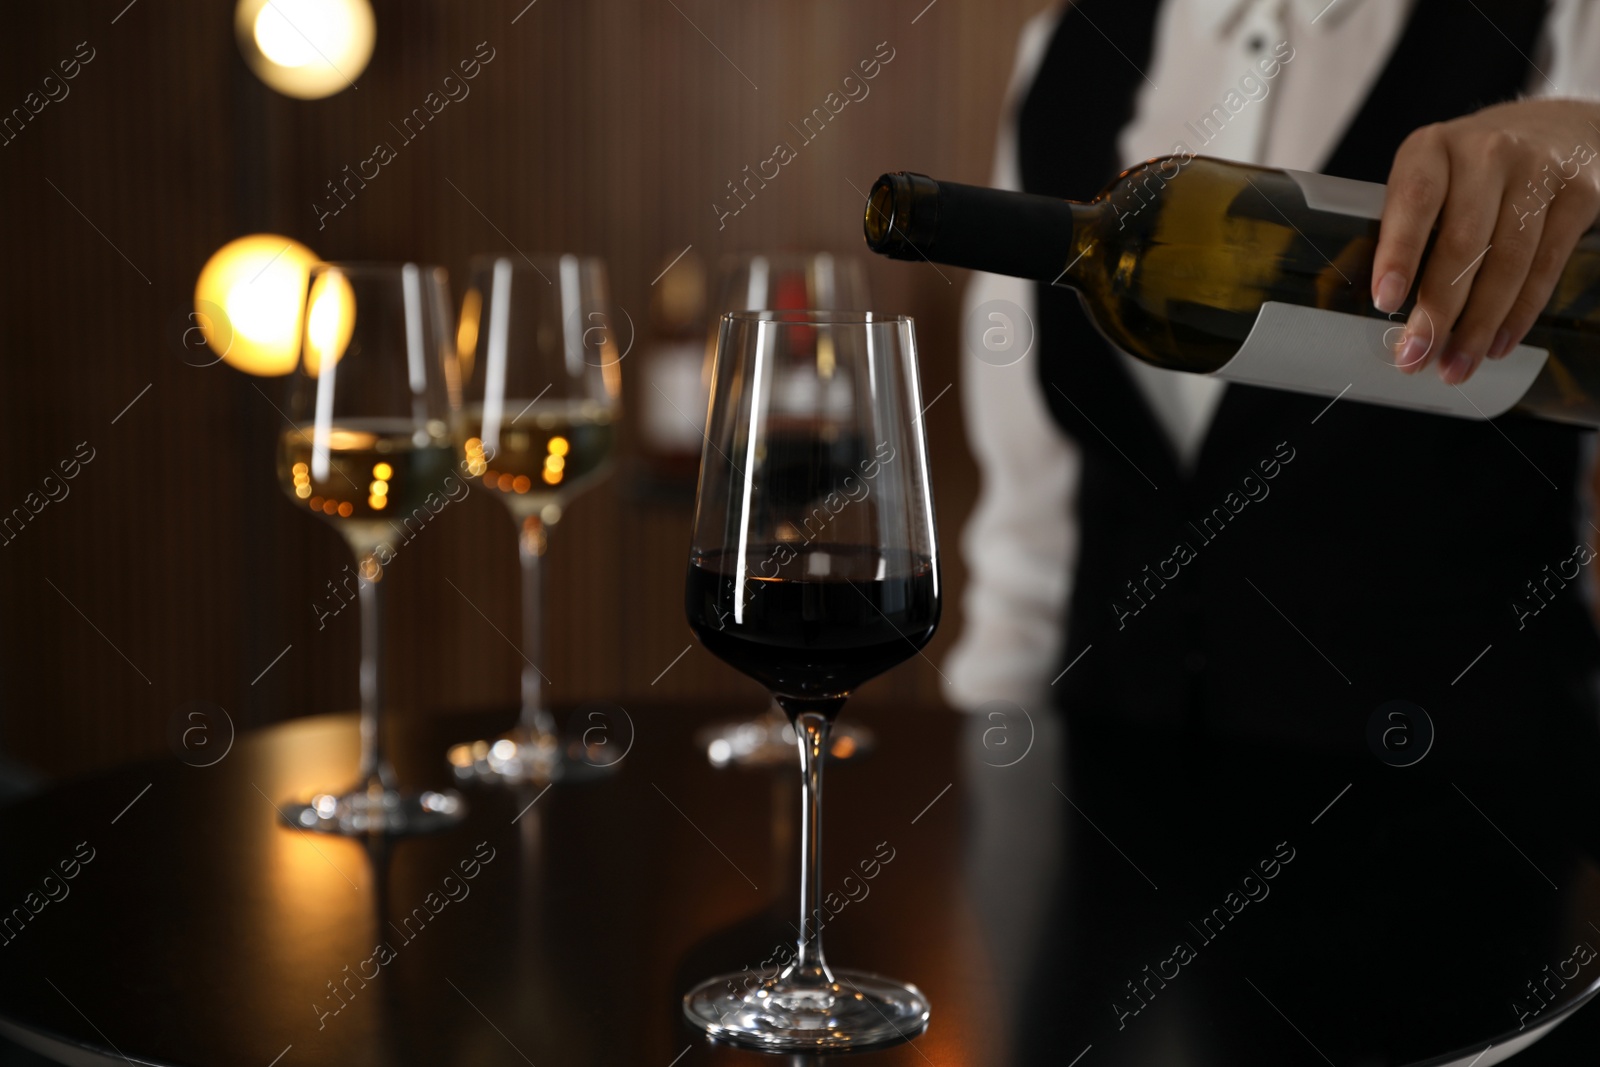 Photo of Waitress pouring wine into glass in restaurant, closeup